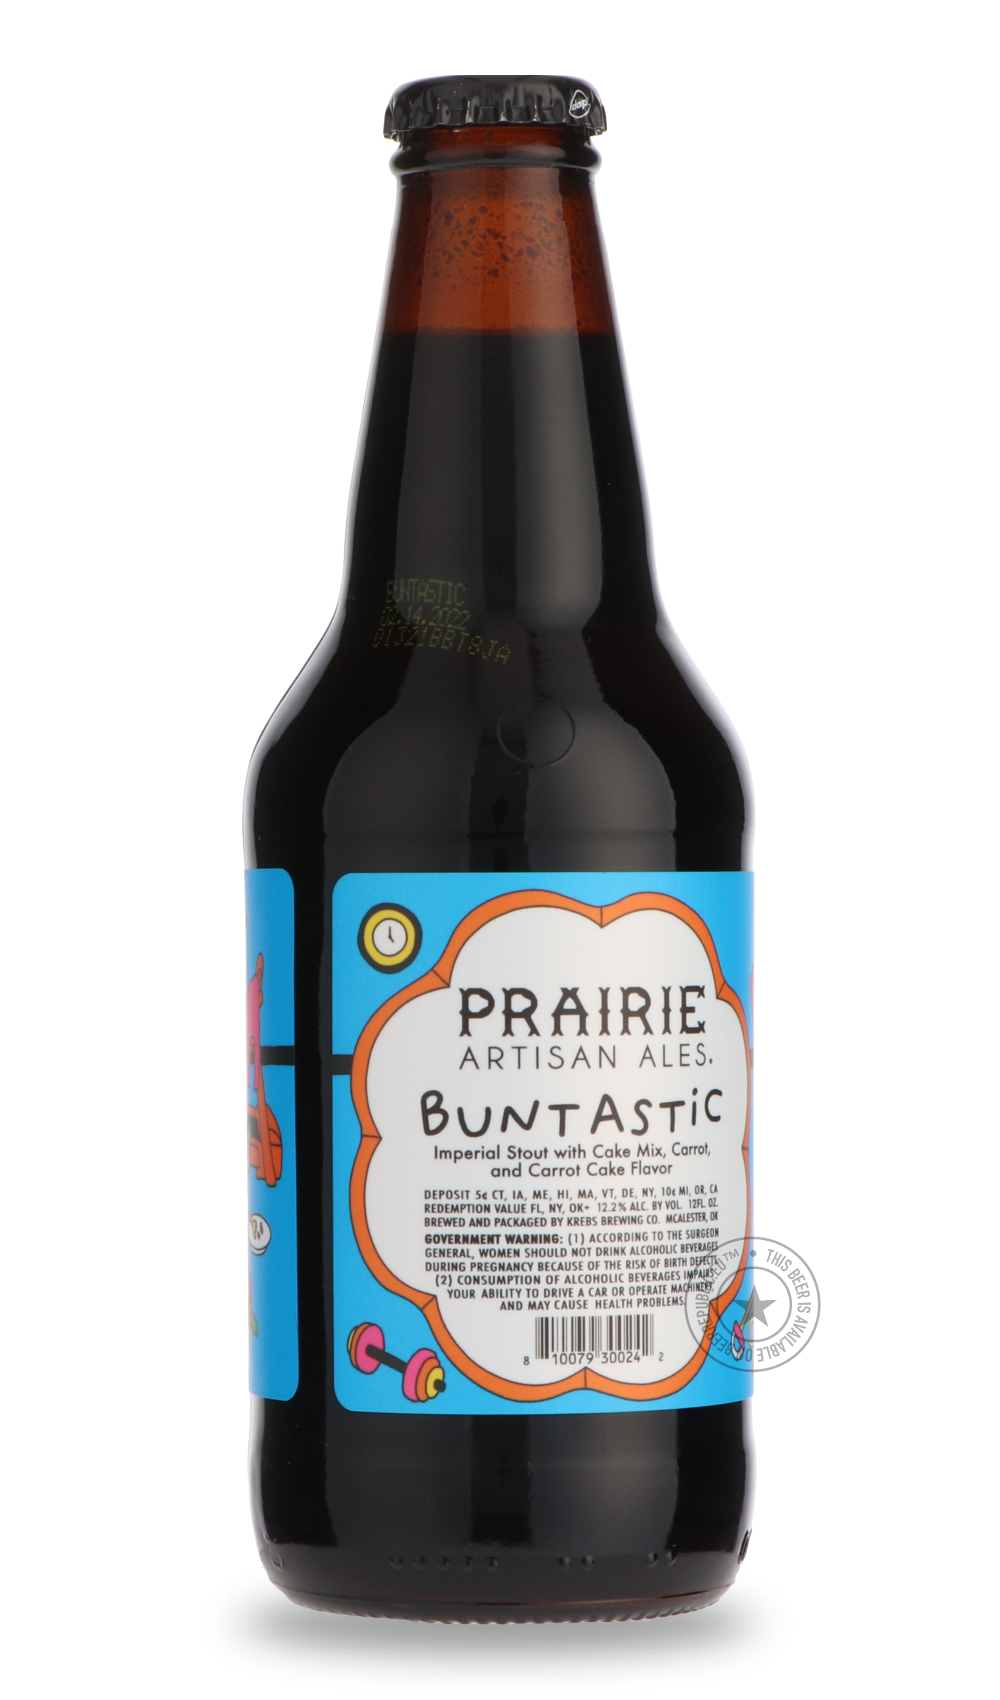 -Prairie- Buntastic-Stout & Porter- Only @ Beer Republic - The best online beer store for American & Canadian craft beer - Buy beer online from the USA and Canada - Bier online kopen - Amerikaans bier kopen - Craft beer store - Craft beer kopen - Amerikanisch bier kaufen - Bier online kaufen - Acheter biere online - IPA - Stout - Porter - New England IPA - Hazy IPA - Imperial Stout - Barrel Aged - Barrel Aged Imperial Stout - Brown - Dark beer - Blond - Blonde - Pilsner - Lager - Wheat - Weizen - Amber - Ba